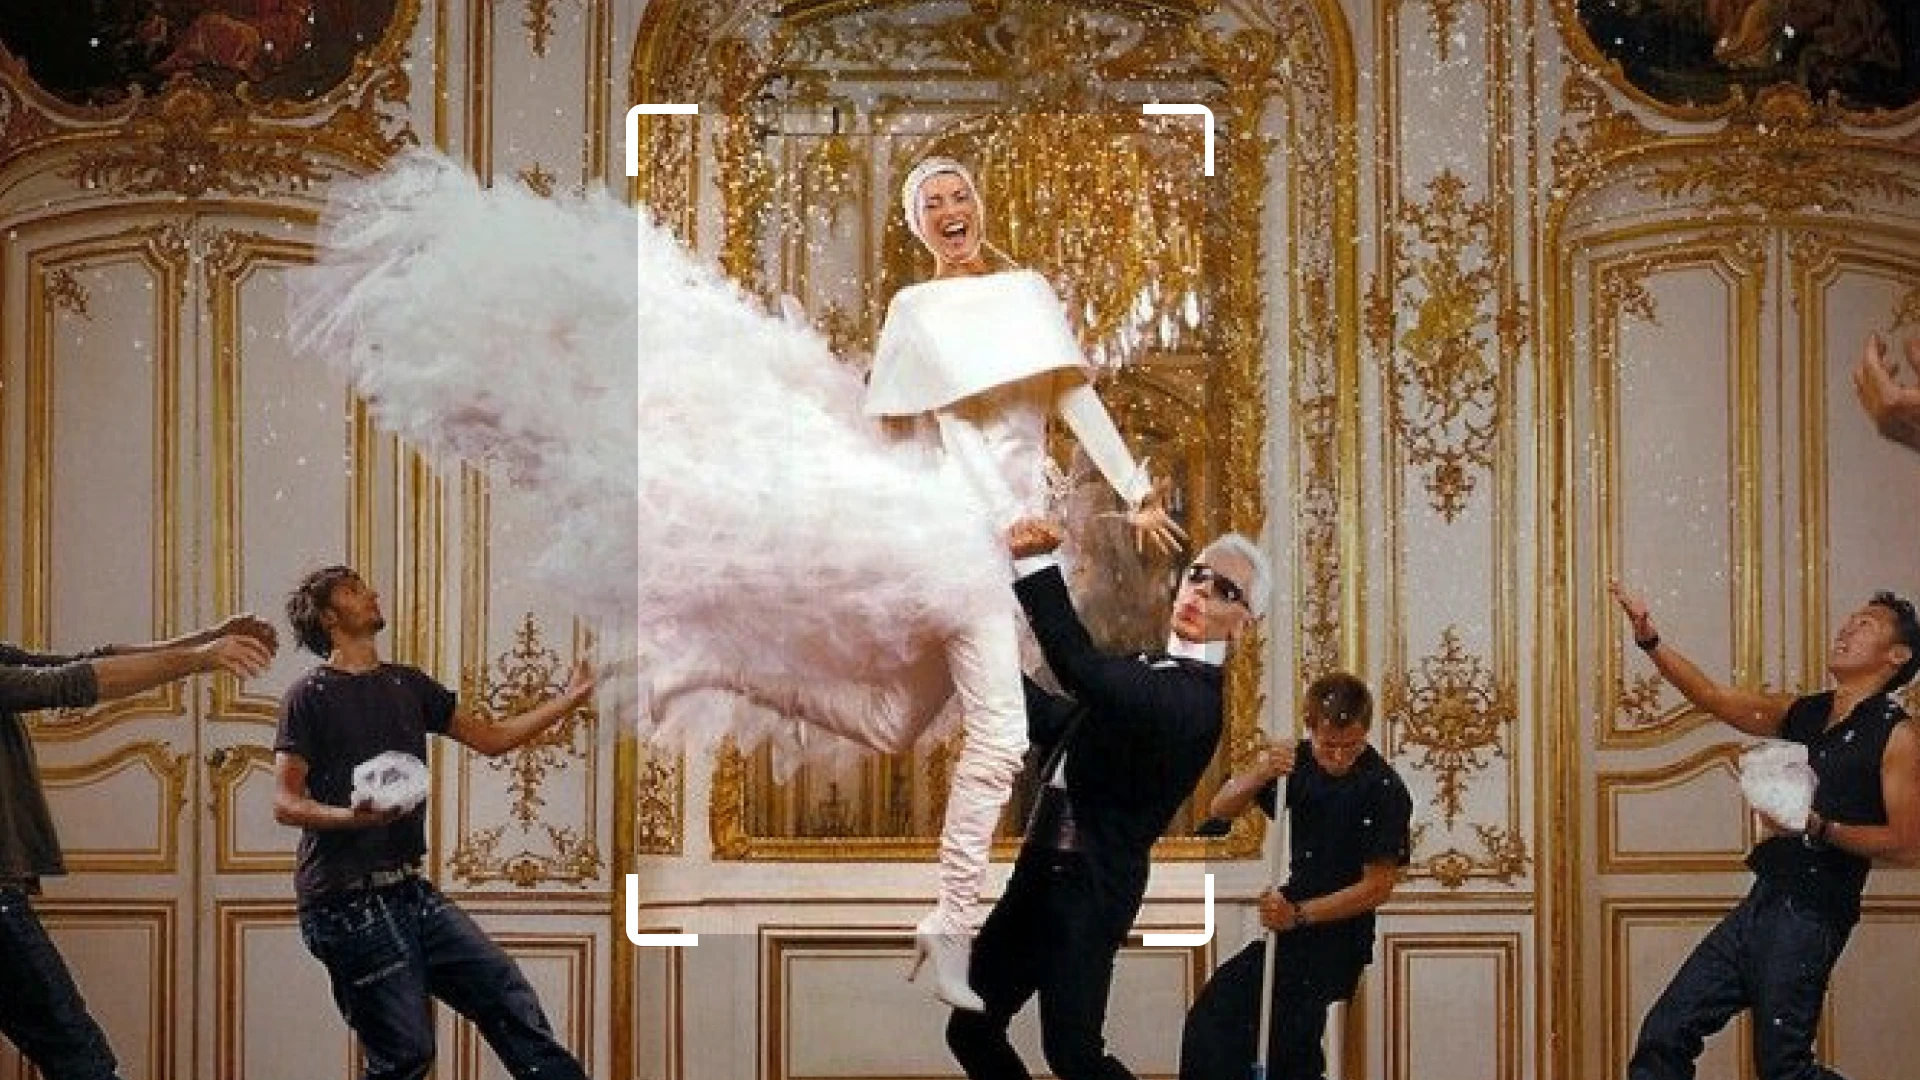 In an ornate golden room, a woman wearing a white outfit adorned with feathers is held up by a man in a black suit